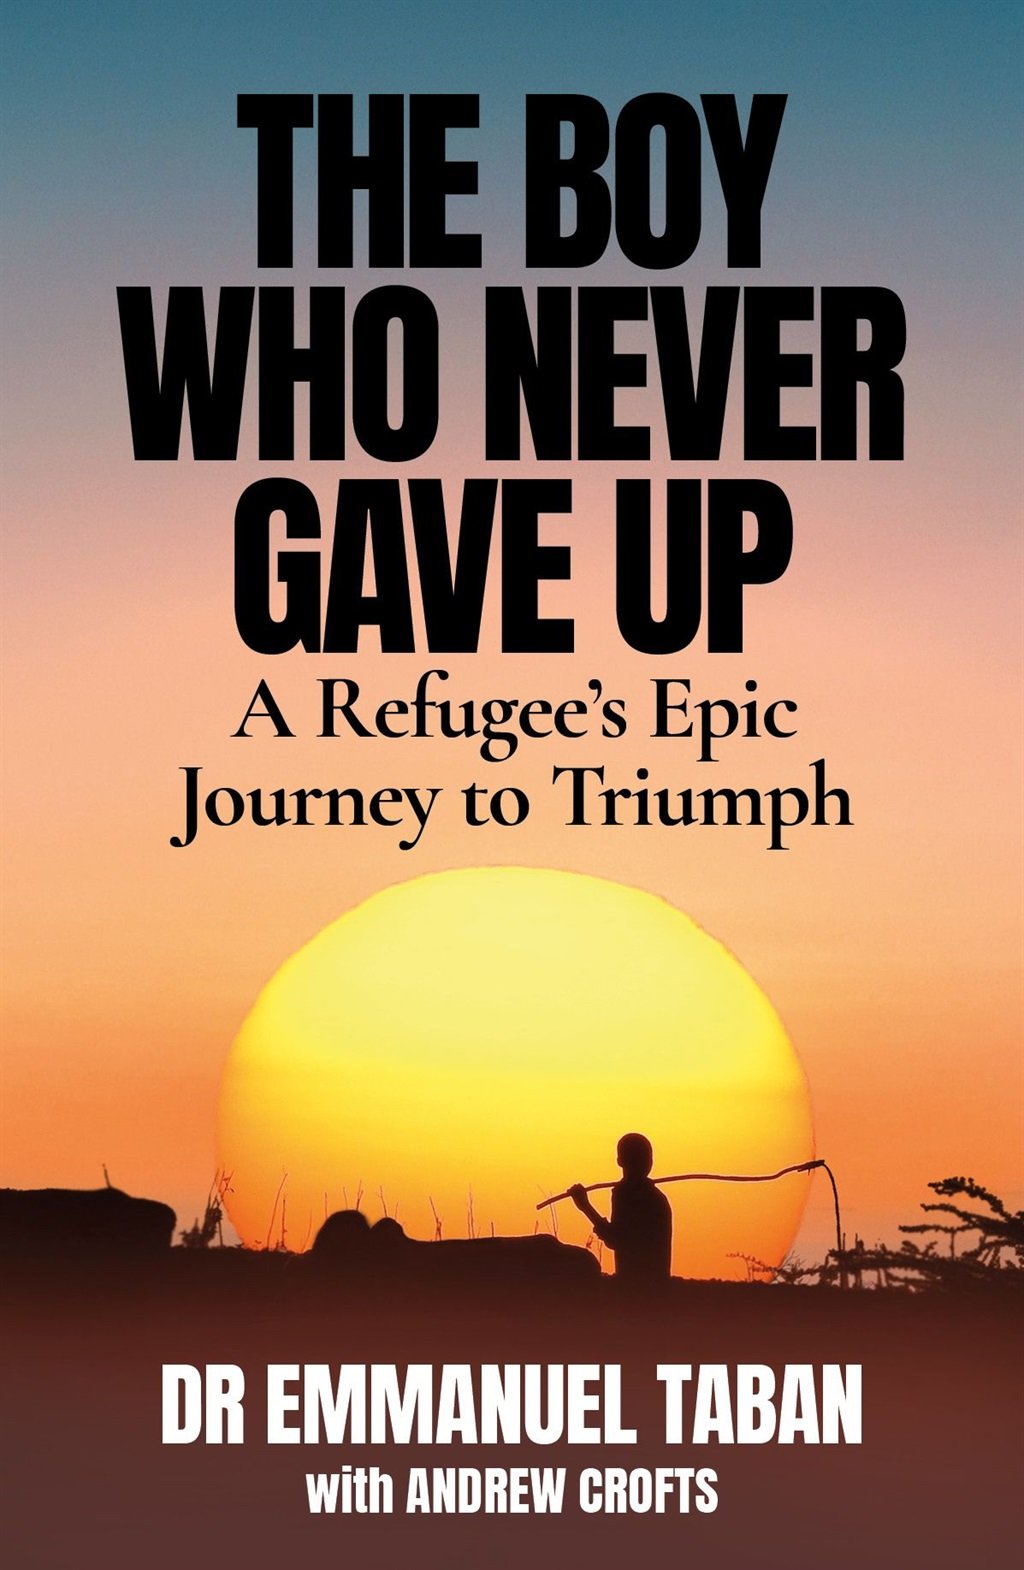 Cover of 'The boy who never gave up' (Supplied)